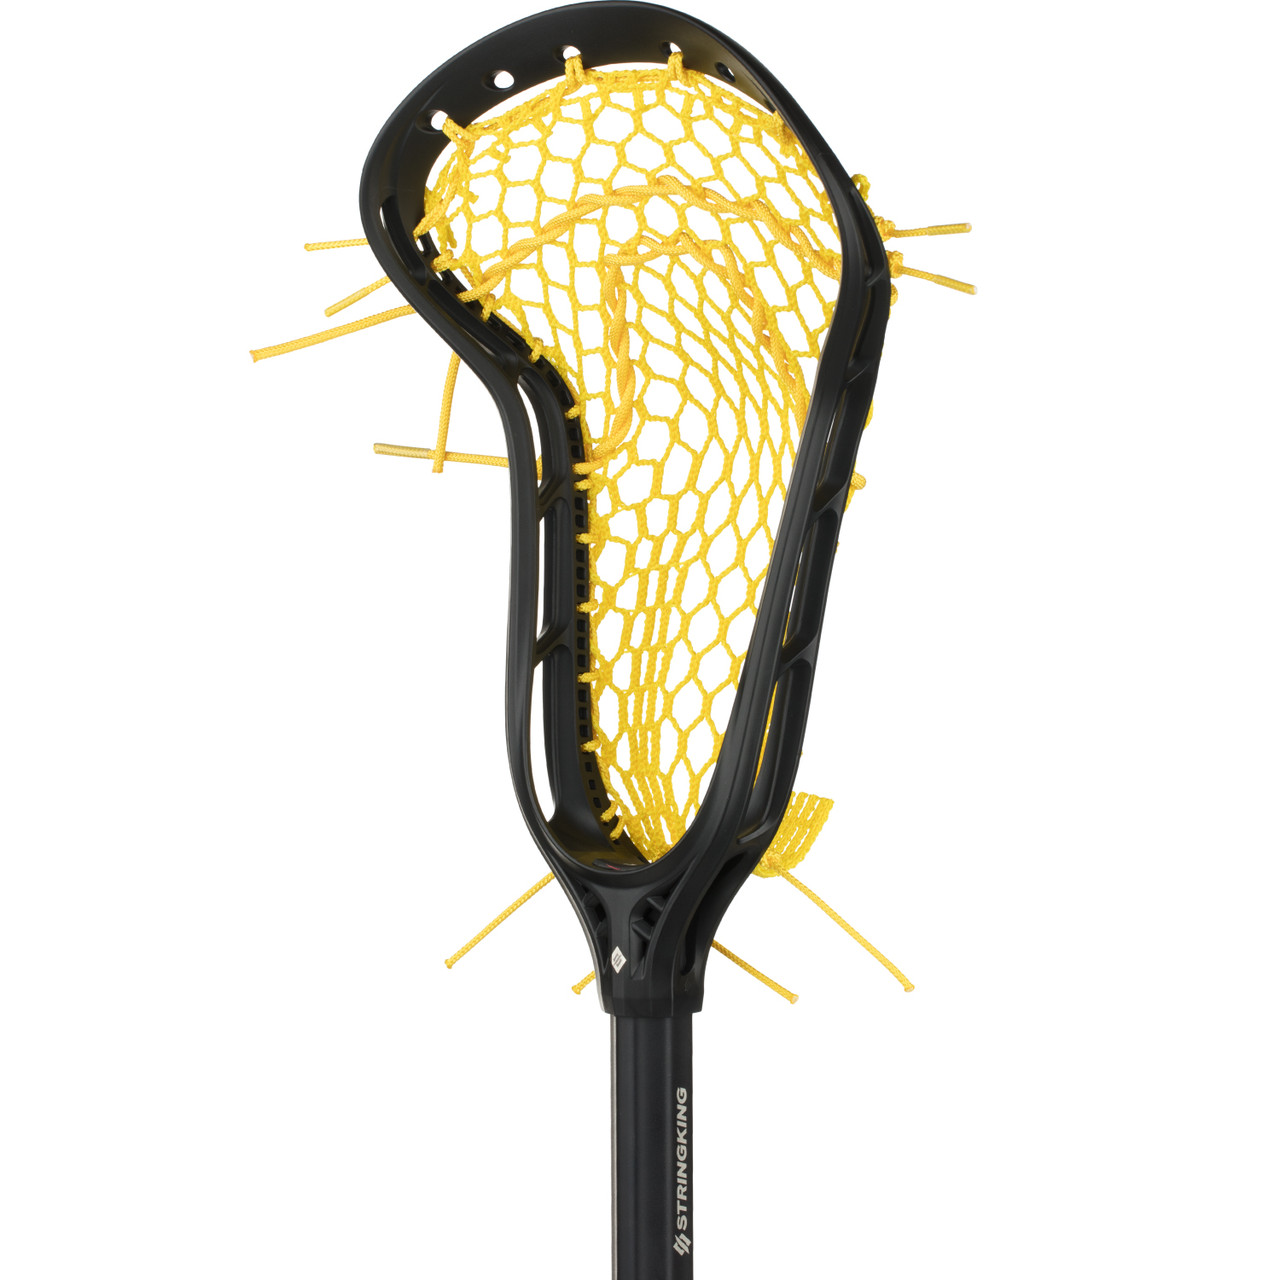 https://cdn11.bigcommerce.com/s-jaokfc/images/stencil/1280x1280/products/1266/6898/StringKing-Womens-Complete-2-Defense-Angle-BlackYellow1500__14058.1583780040.jpg?c=2